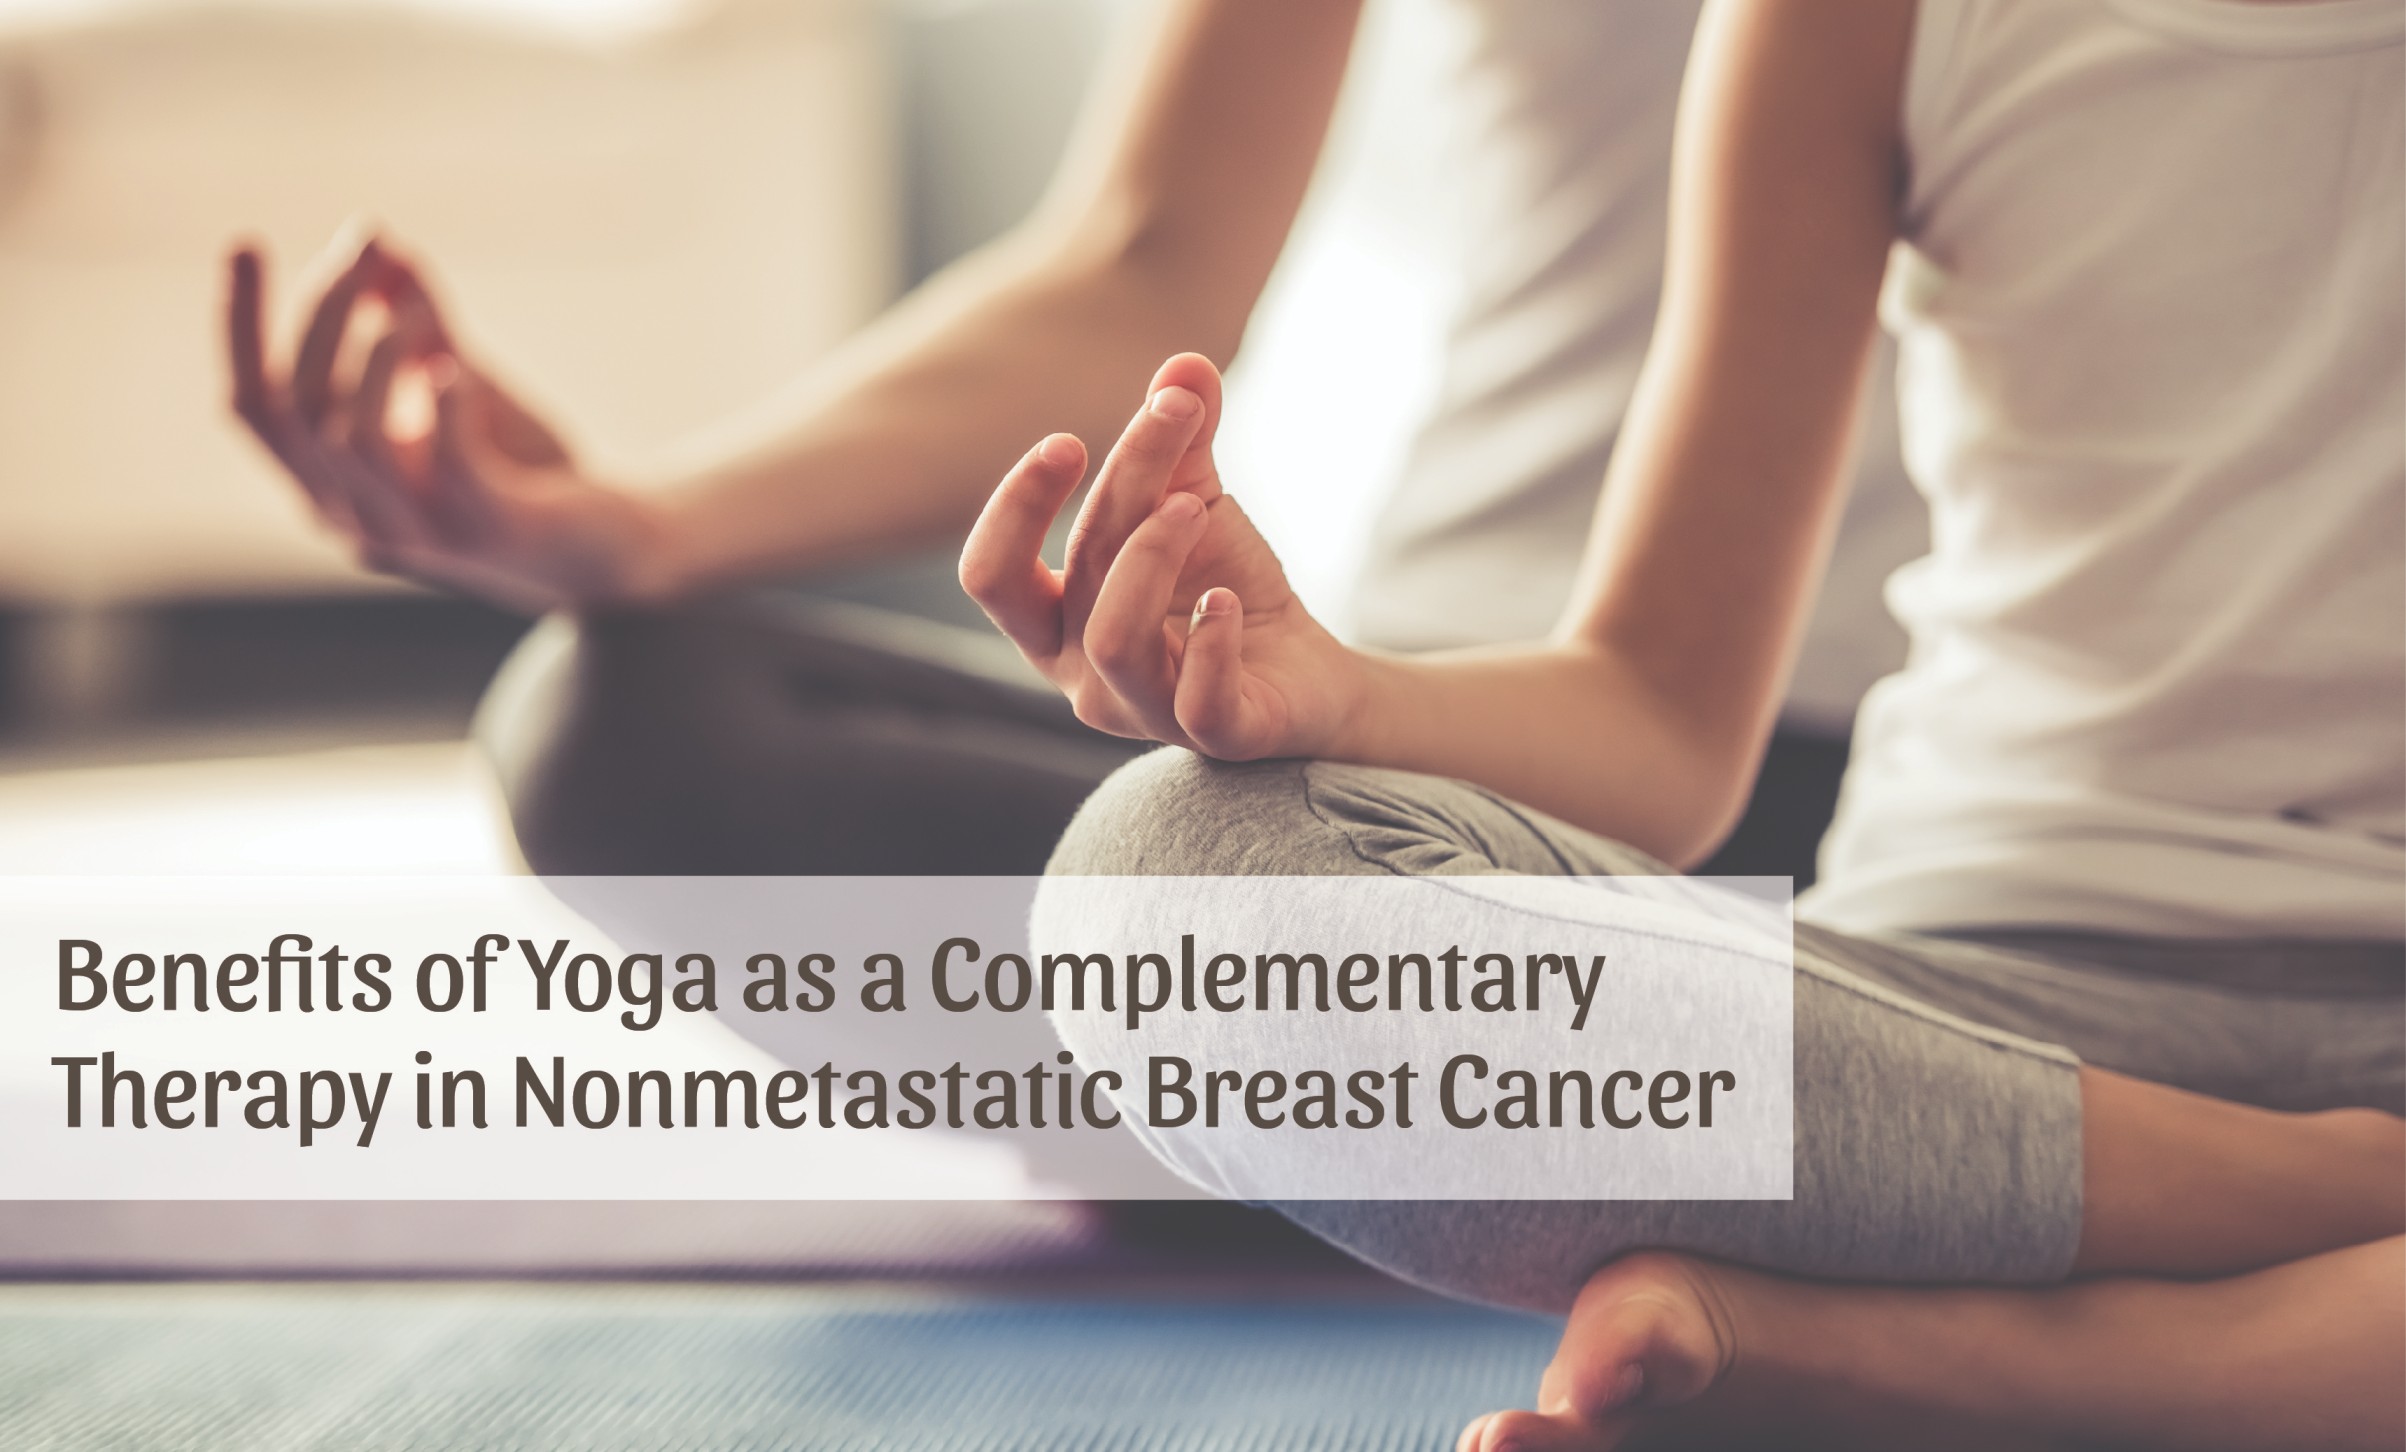 Nair Notes the Benefits of Yoga as a Complementary Therapy in Nonmetastatic Breast Cancer